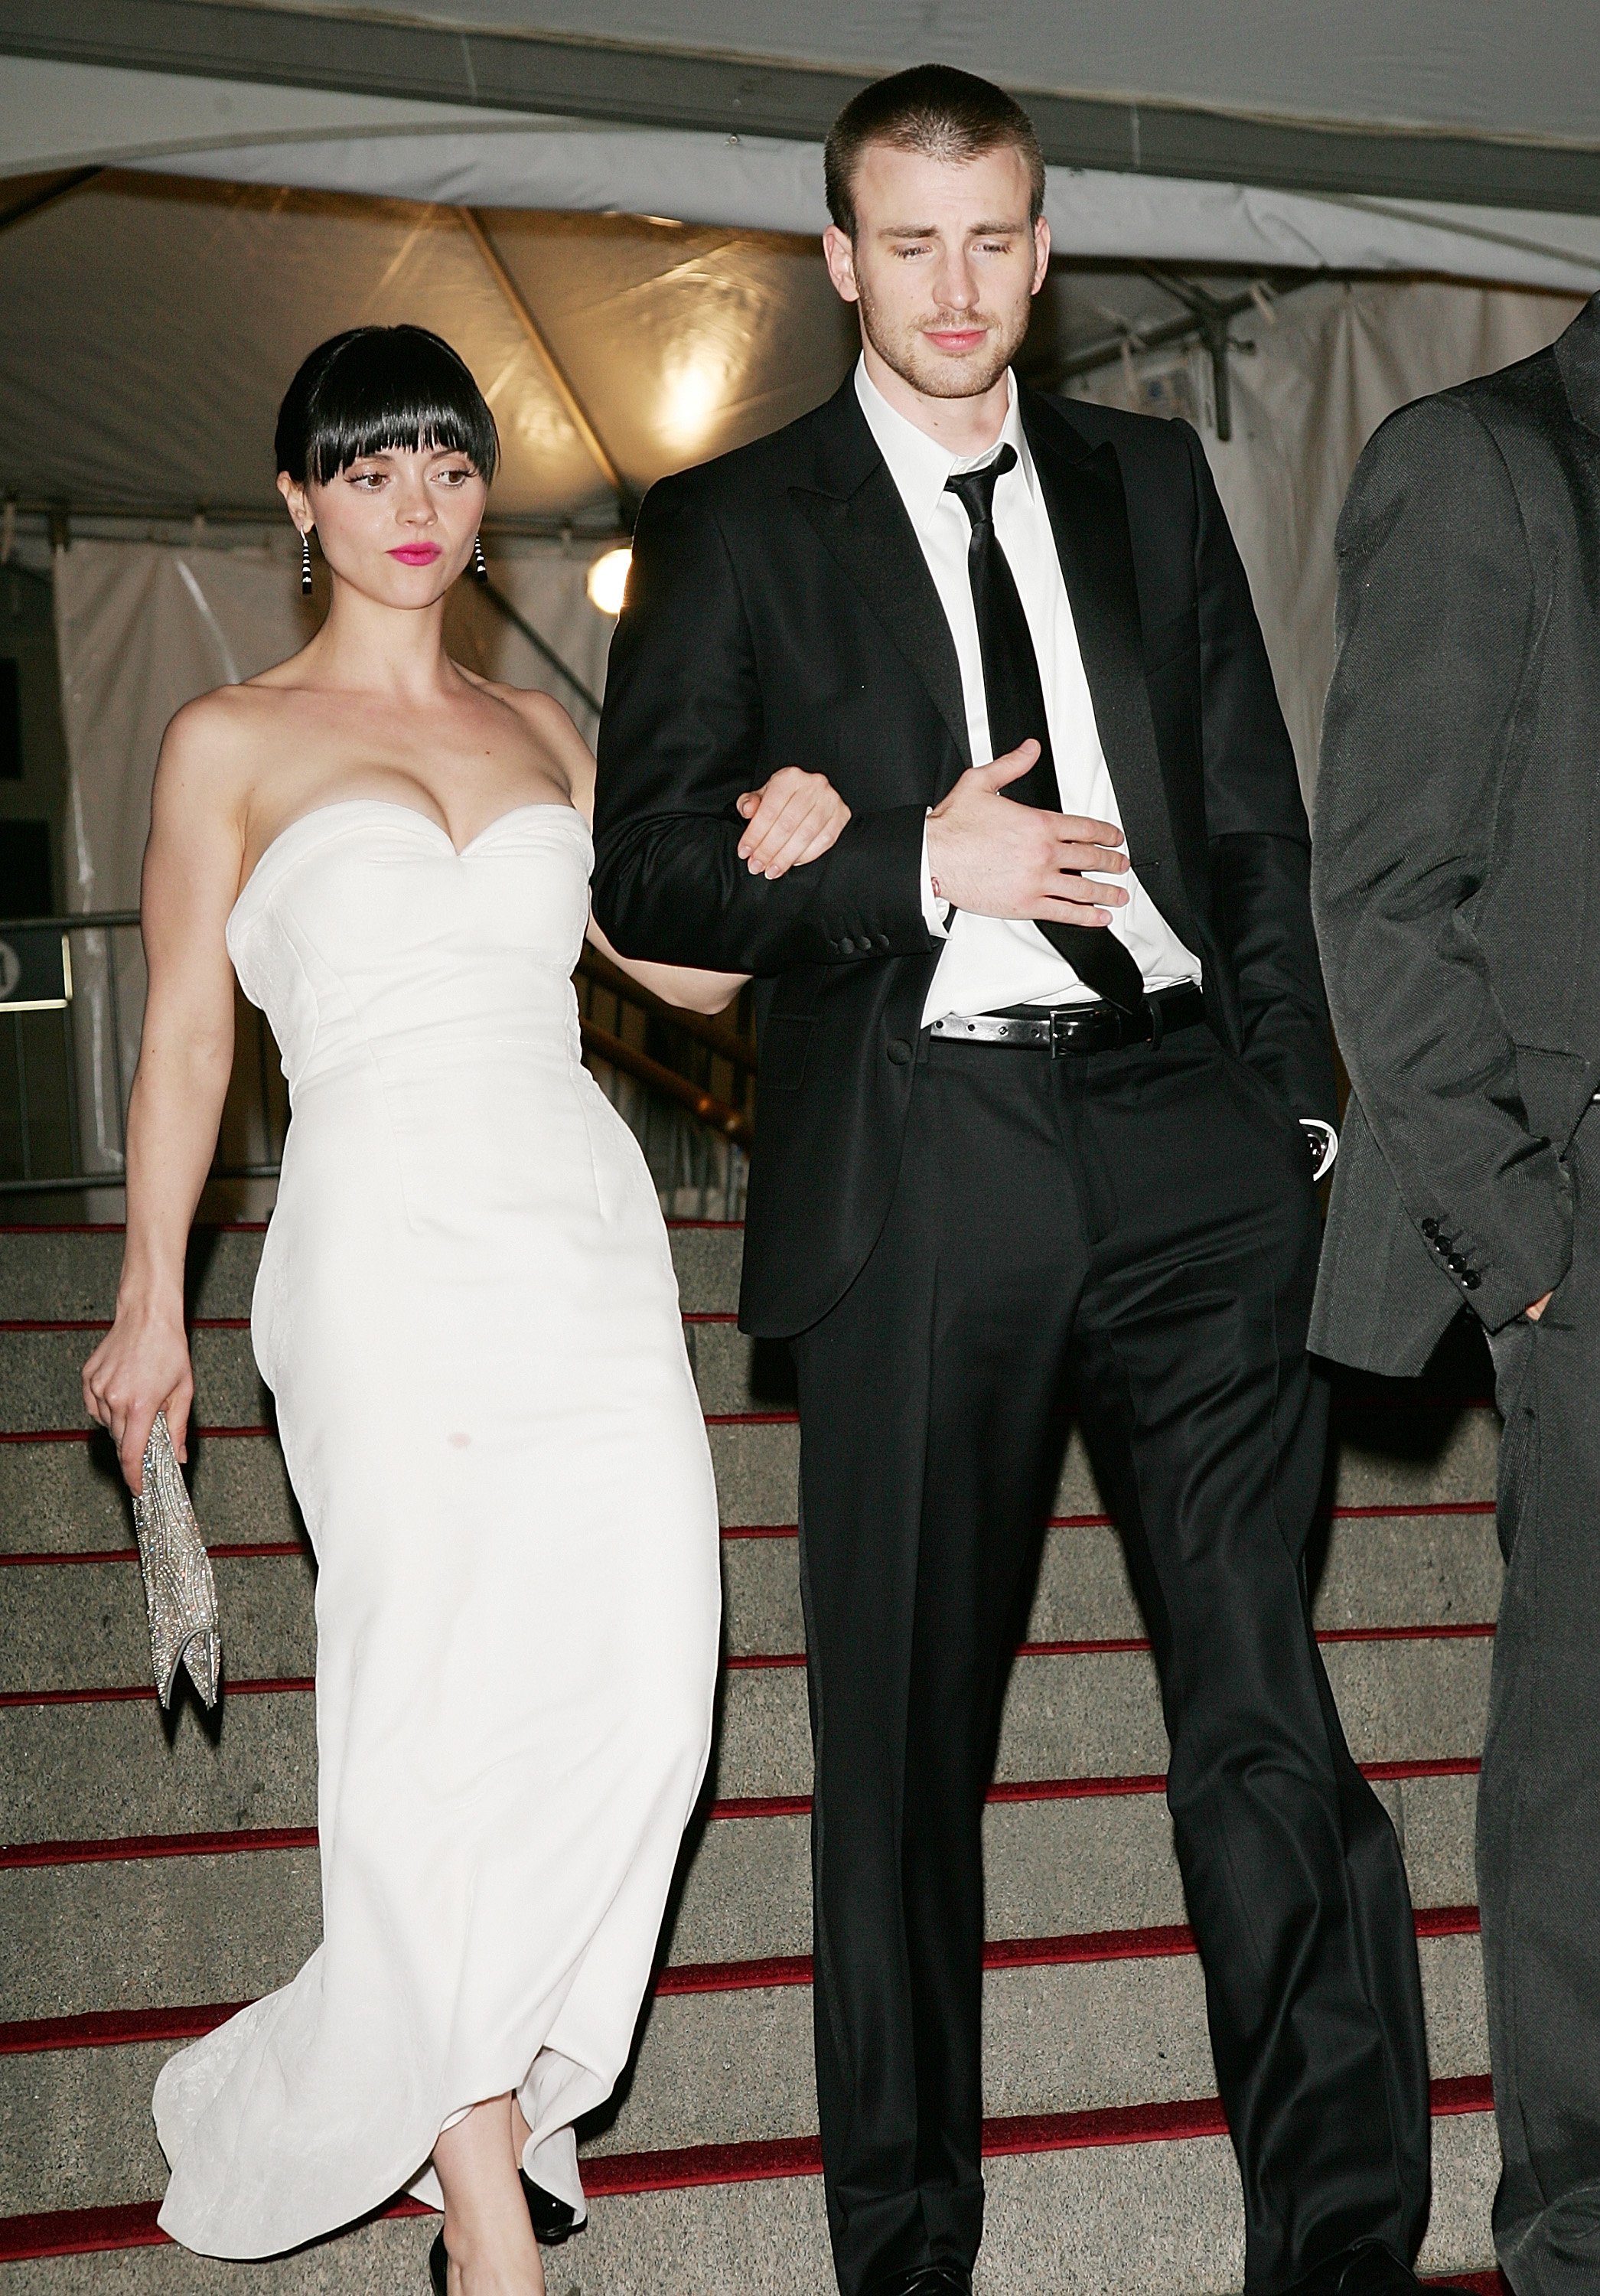 Christina Ricci and Chris Evans at the Met Gala on May 07, 2007 | Source: Getty Images